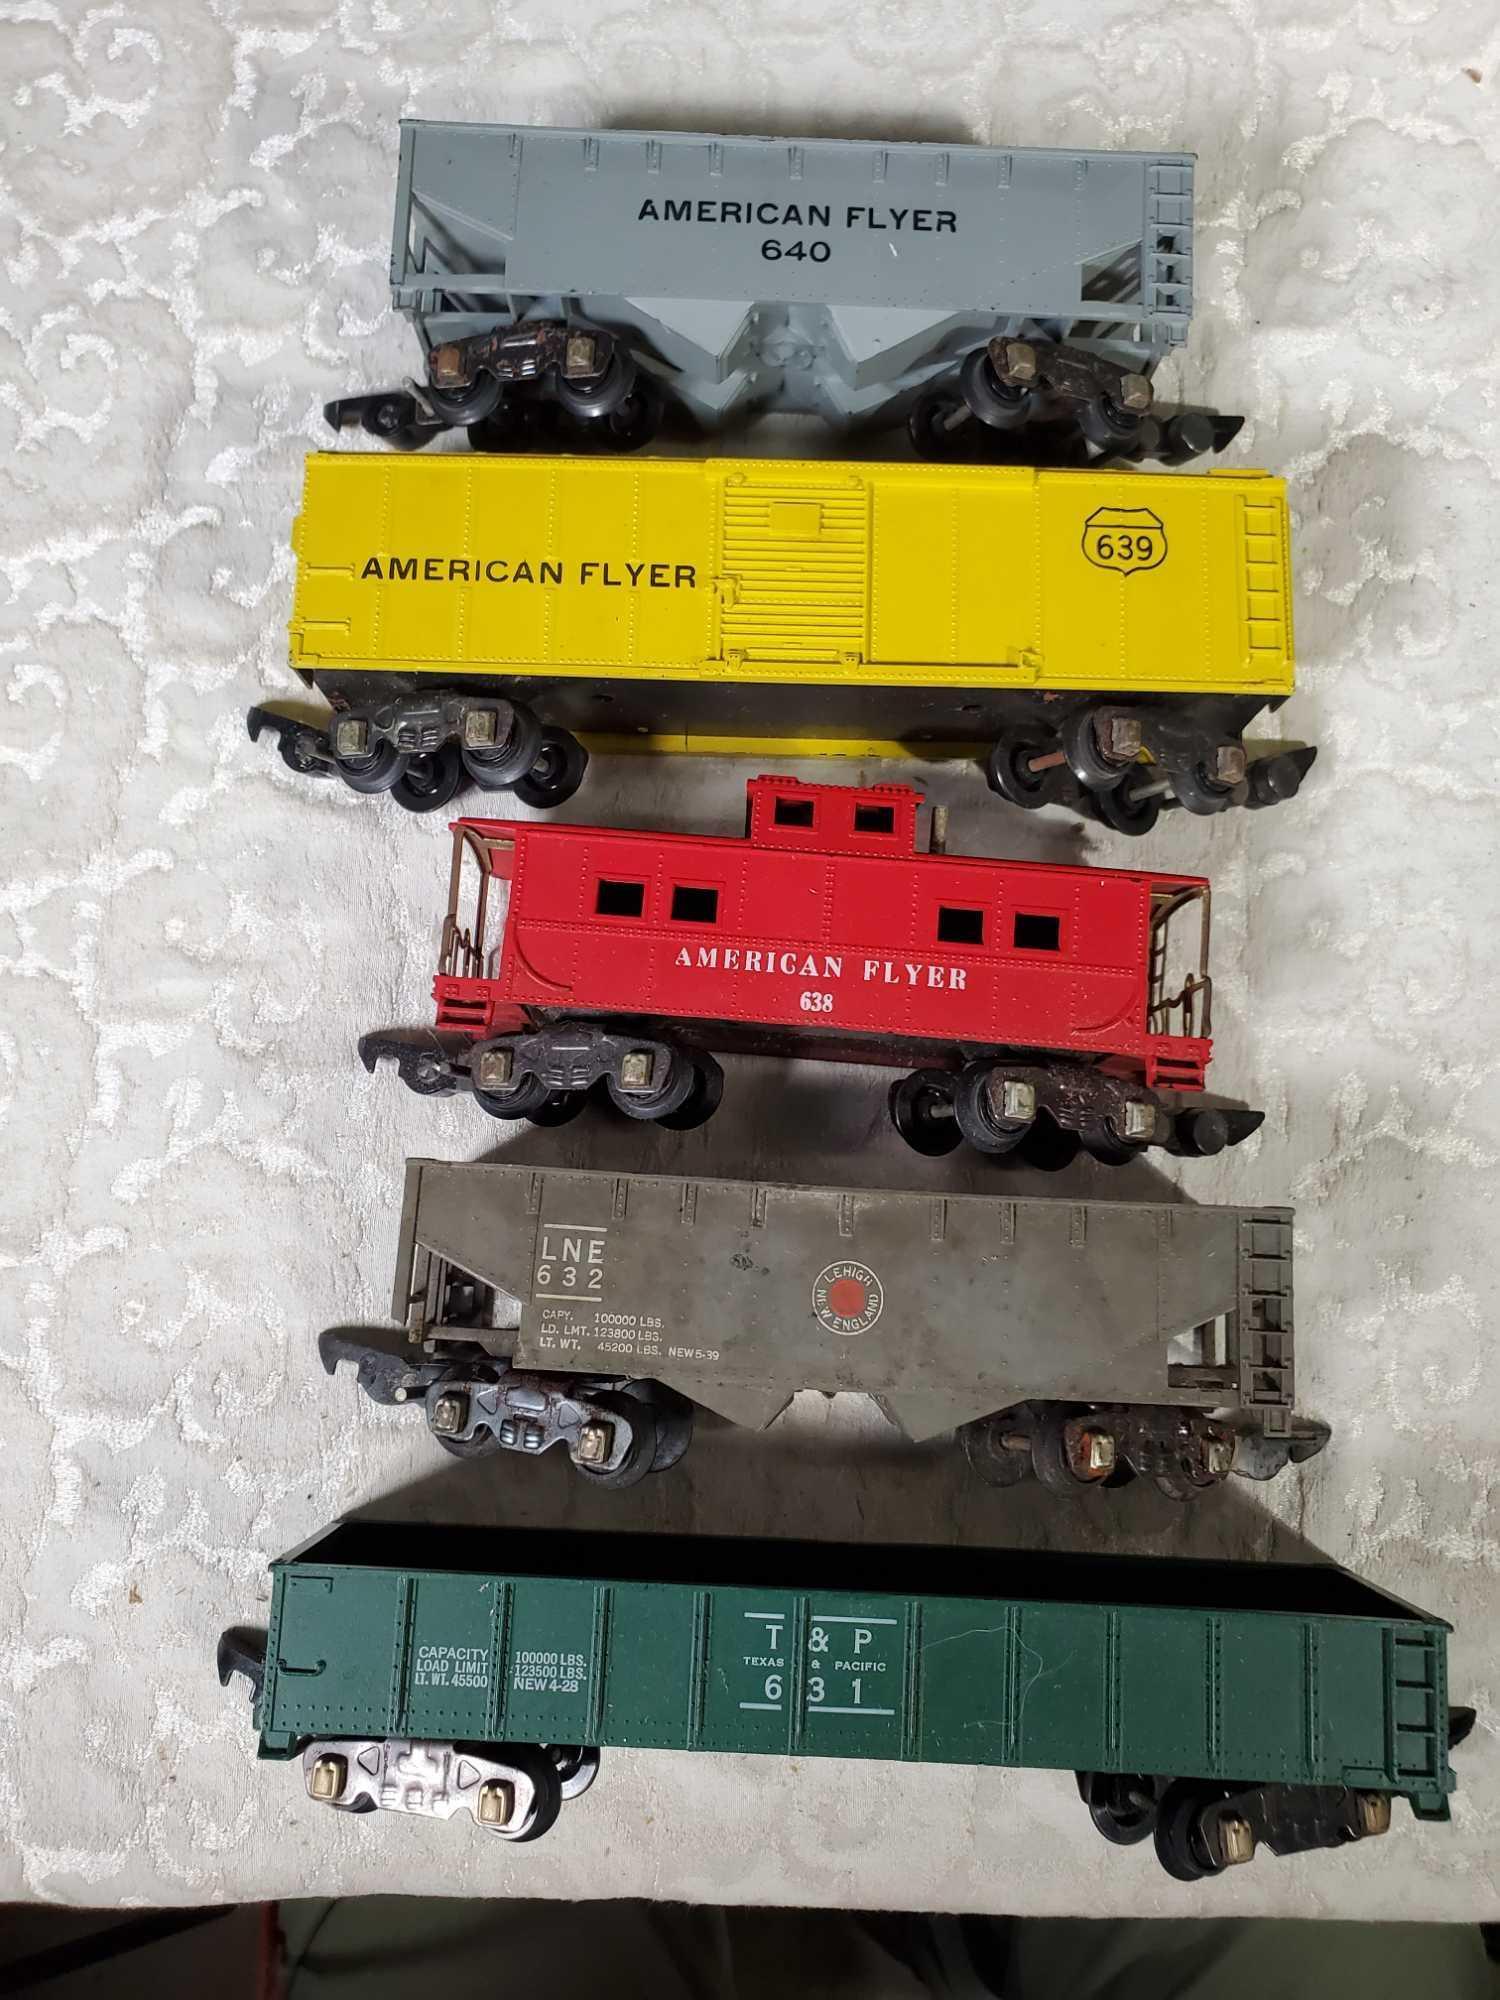 Gilbert/ American Flyer Post War Model Railroad Engines, Cars and Accessories with Some As Is Boxes